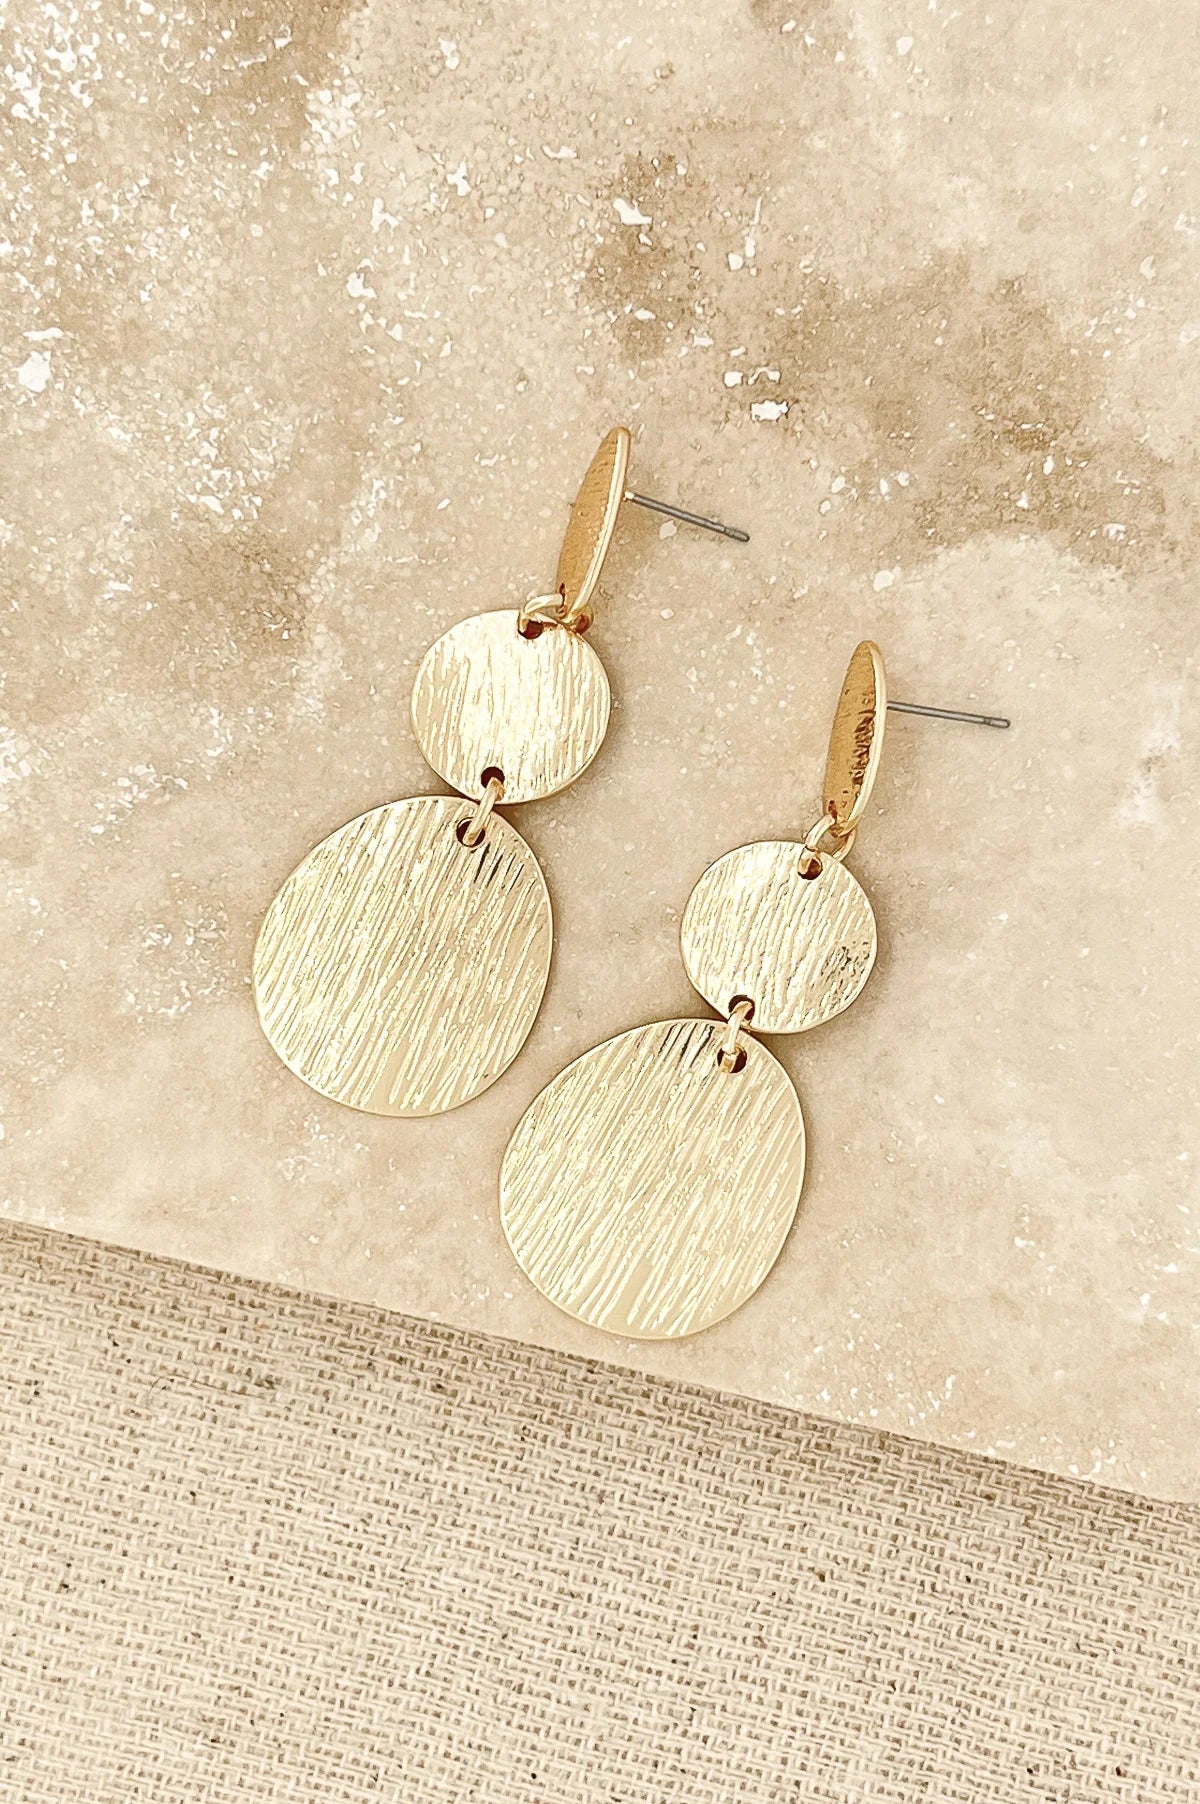 Textured, Burnished Gold Toned Drop Earrings